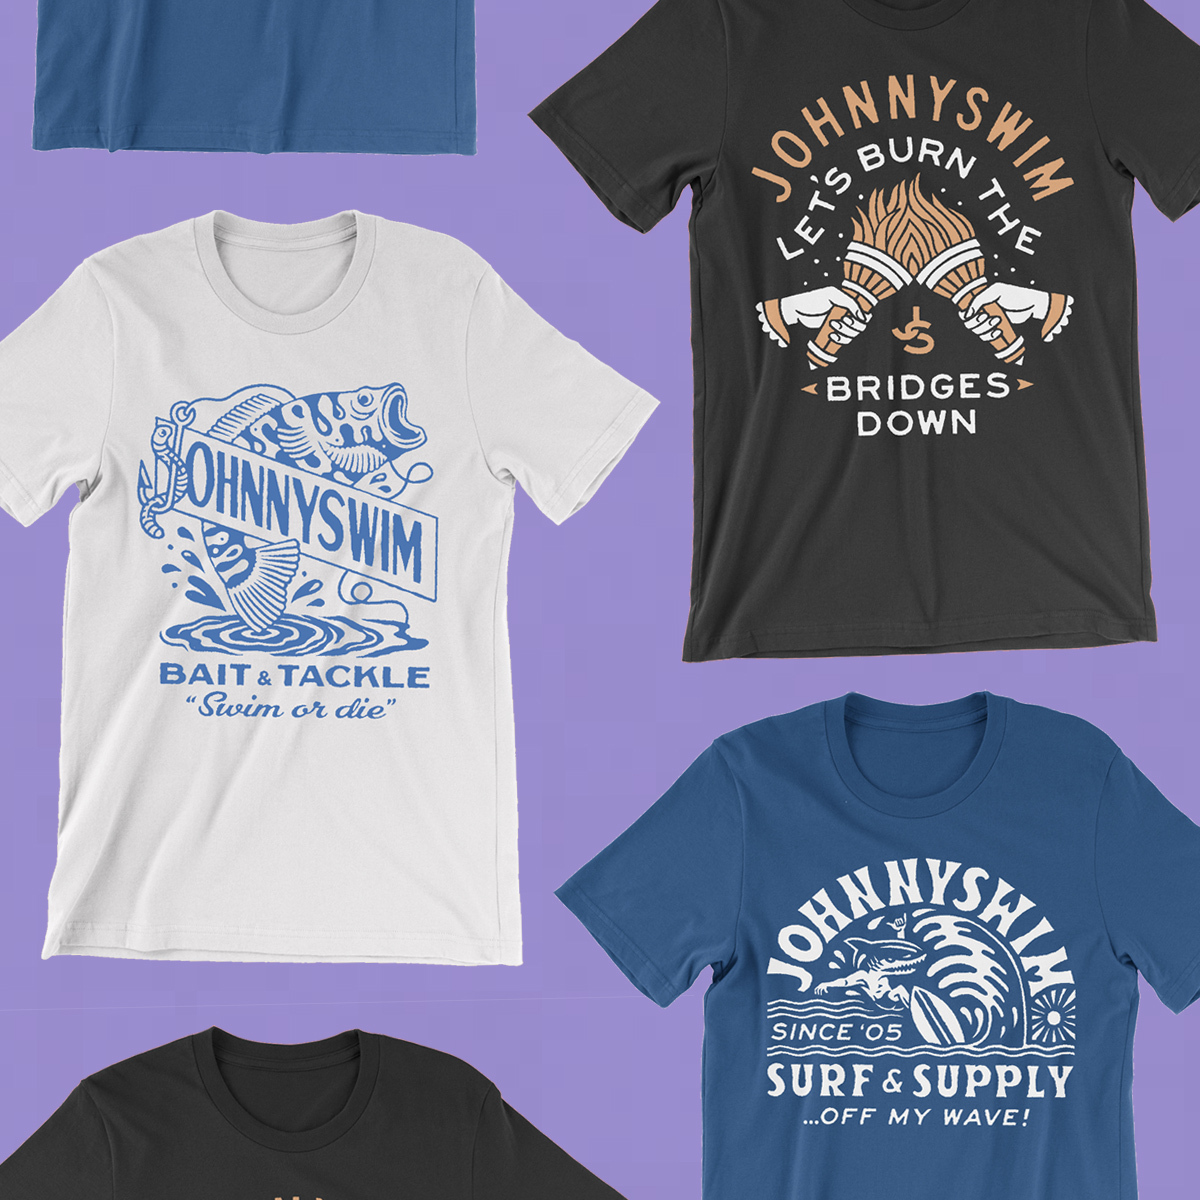 JohnnySwim T-shirts - Fonts In Use